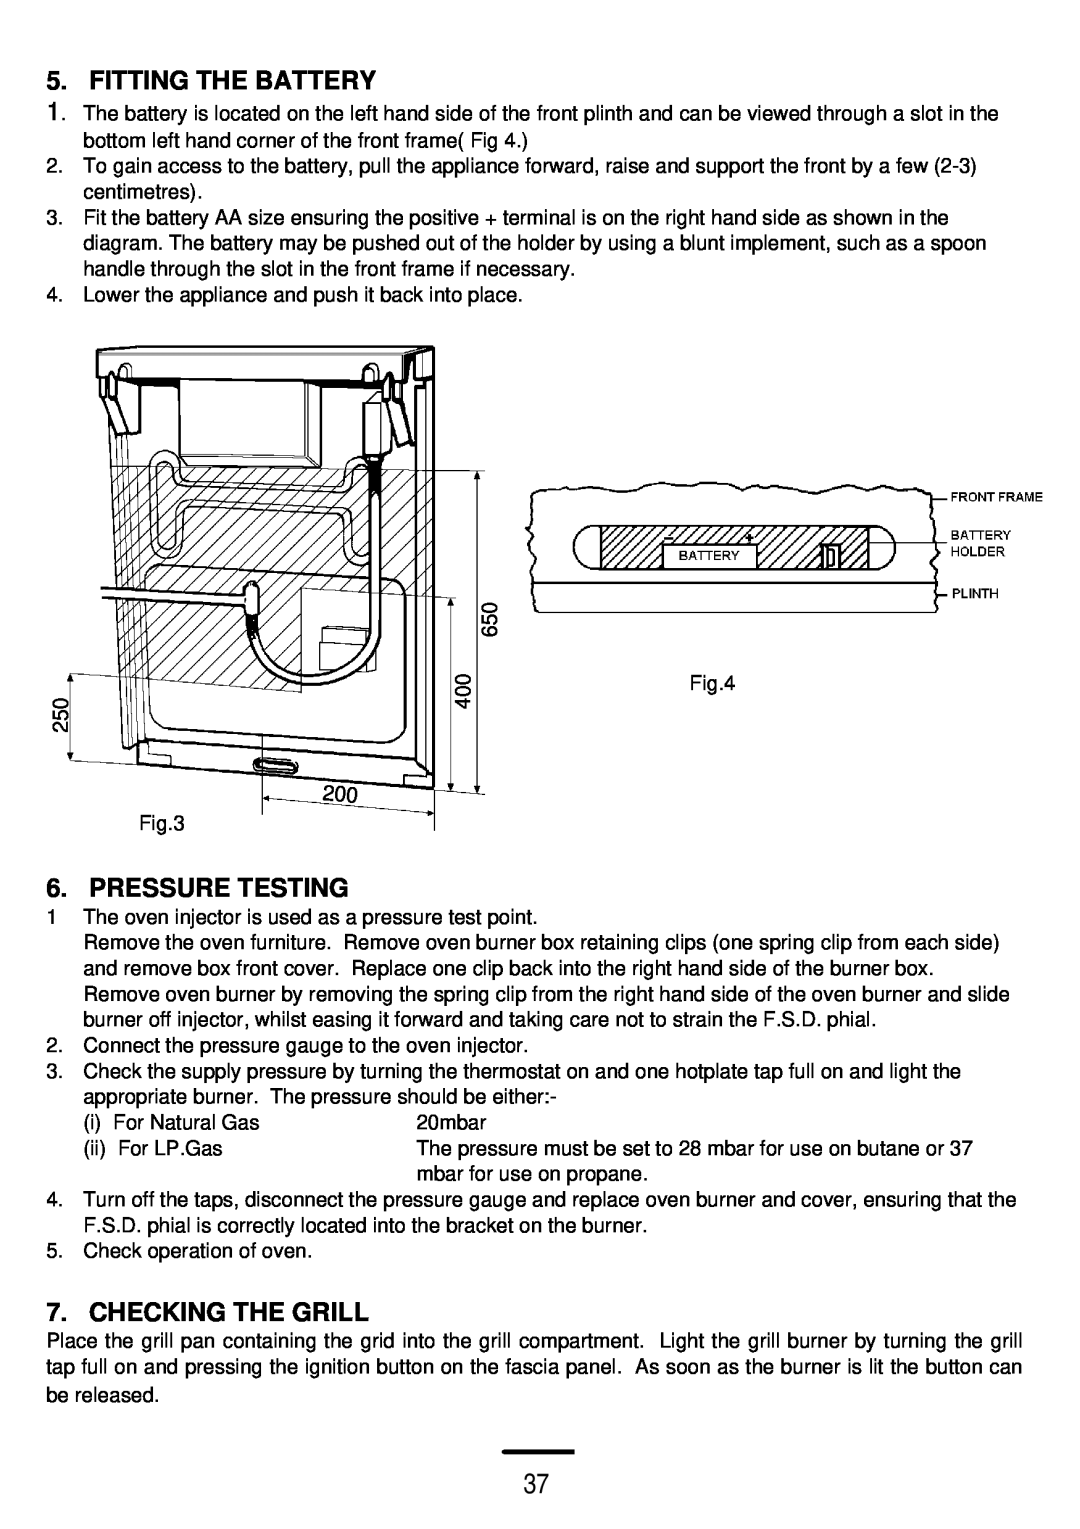 Electrolux 5 0 G L installation instructions Fitting The Battery, Pressure Testing, Checking The Grill 